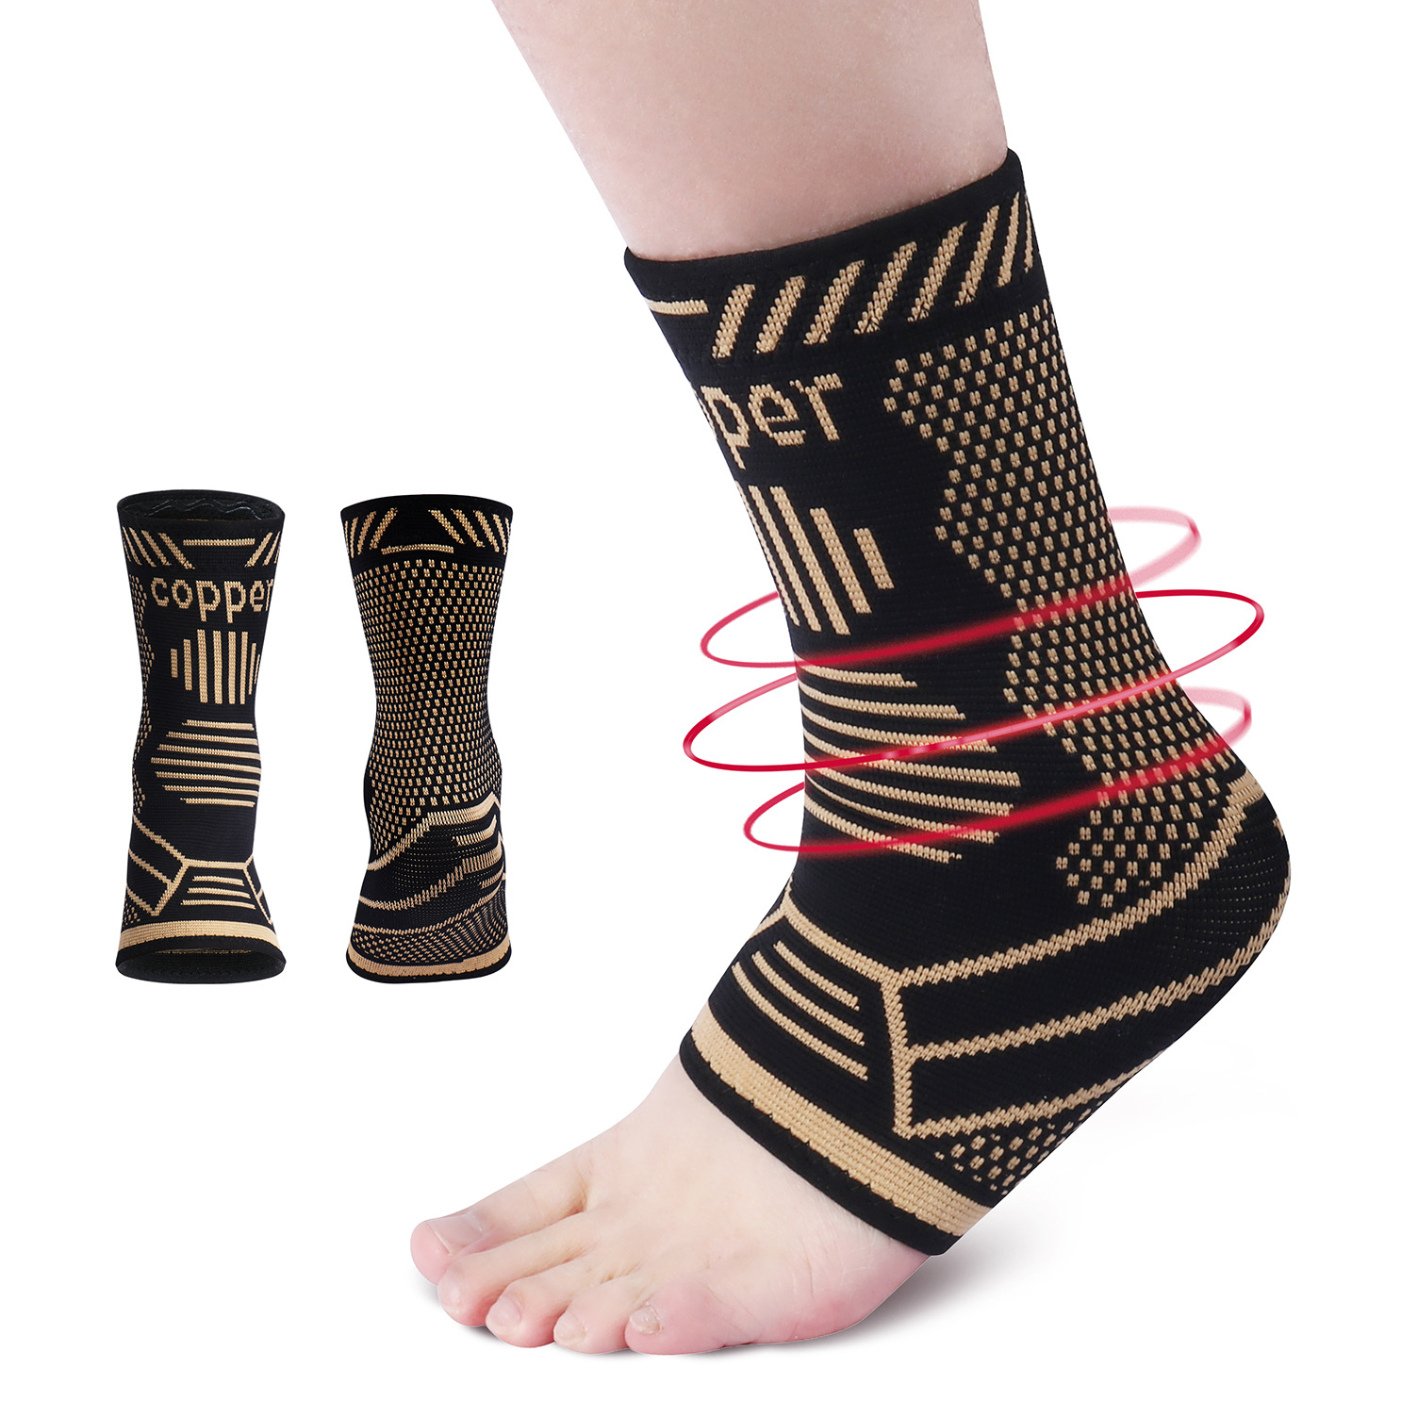 HJ092 Ankle Brace Compression Support Sleeve (1pcs) for Injury Recovery, Joint Pain and More. Achilles Tendon Support, Plantar Fasciitis Foot Socks with Arch Support, Eases Swelling